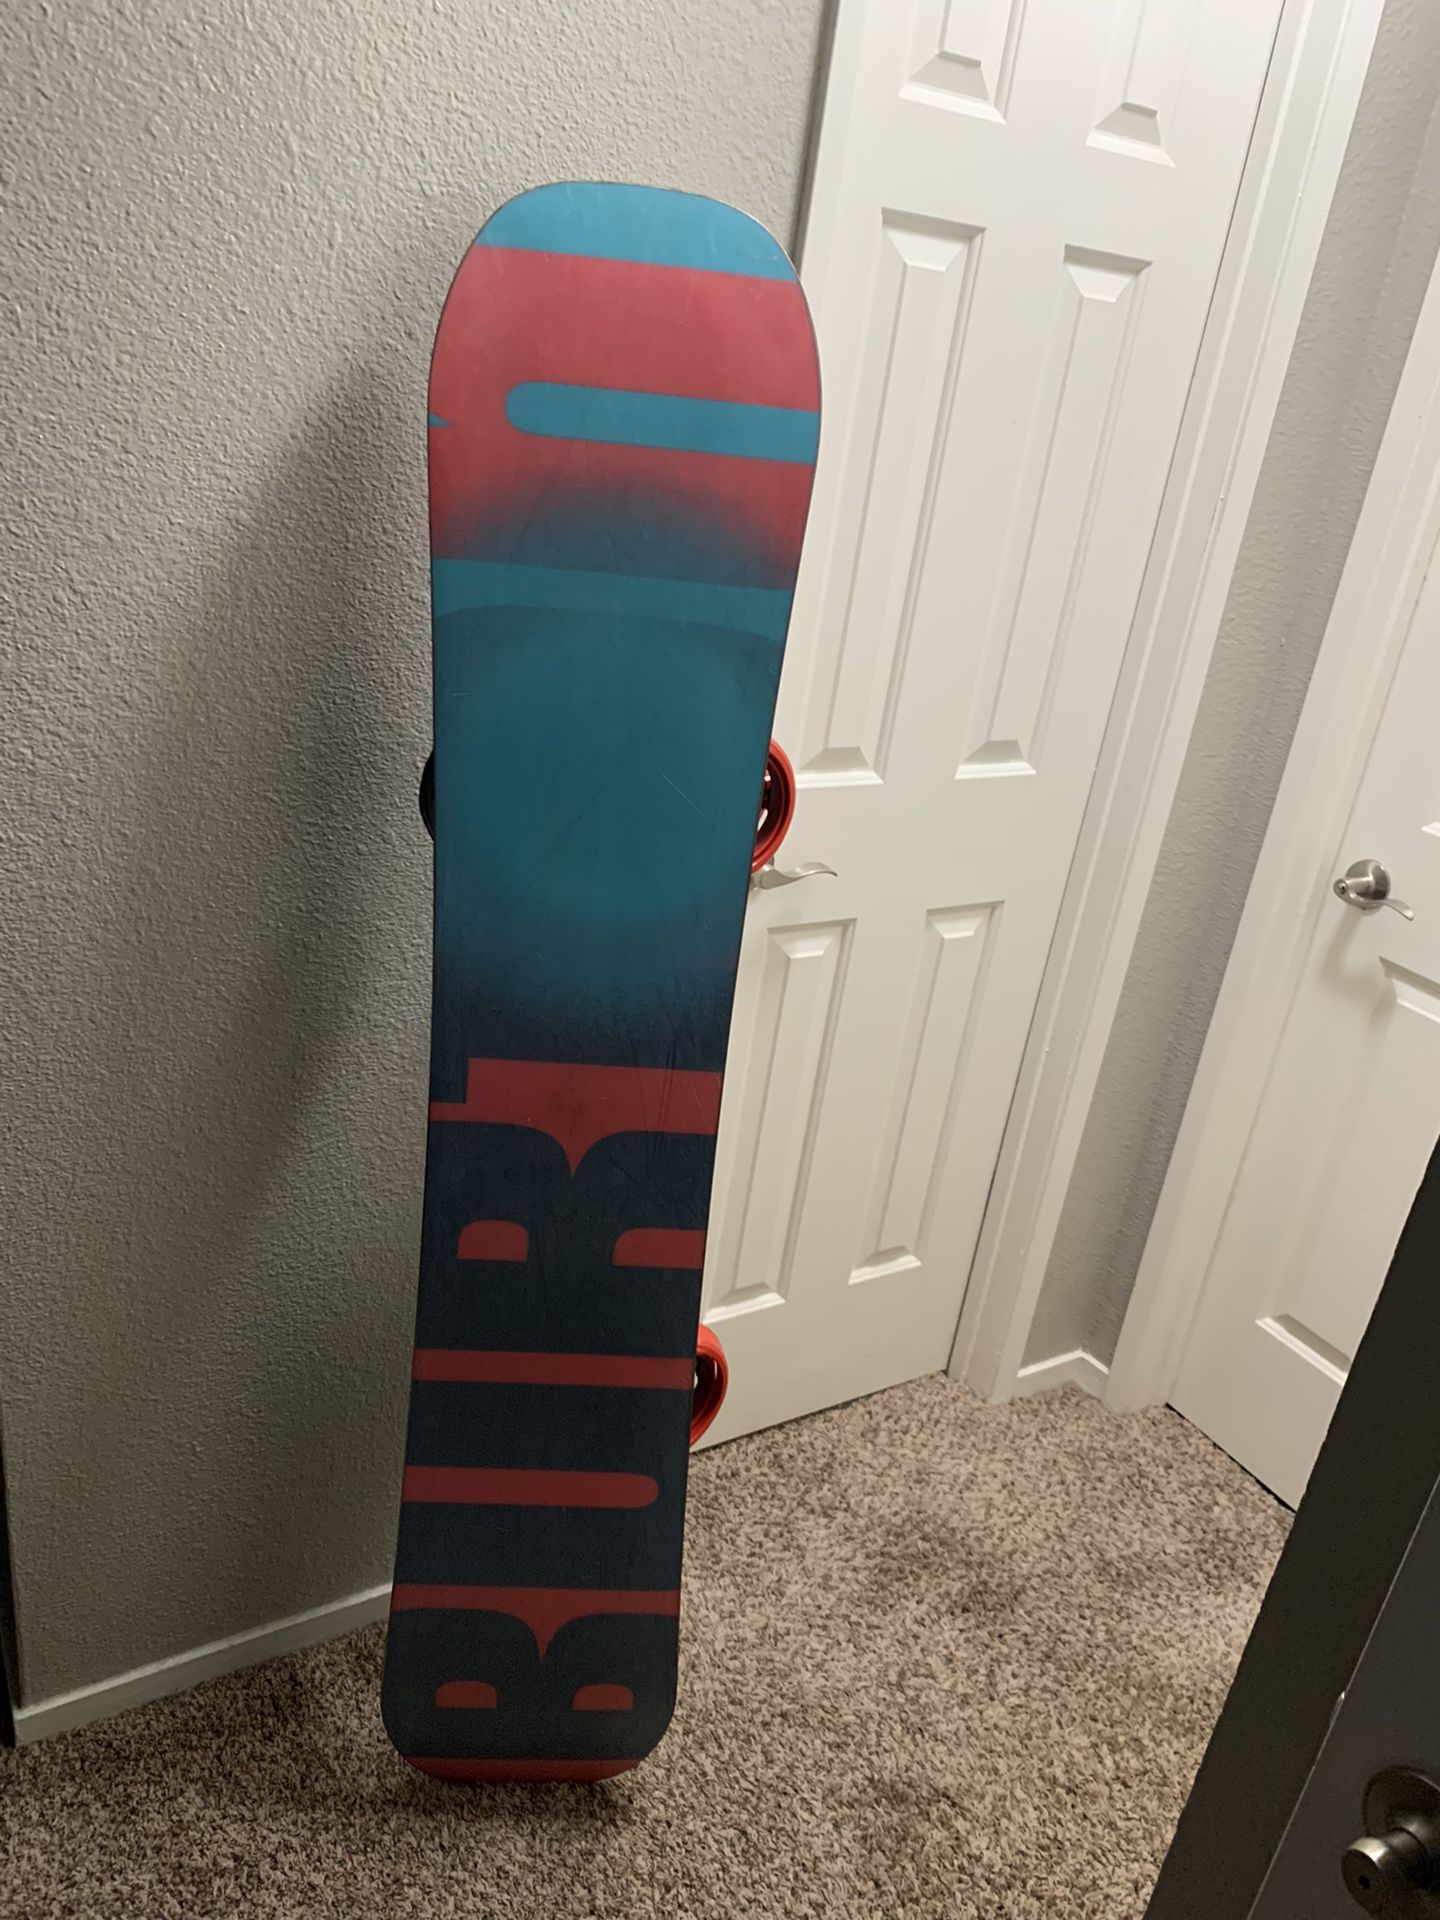 tijger Thermisch rots Burton Process Flying V Snowboard Size 162W Wide Version for Sale in San  Leandro, CA - OfferUp